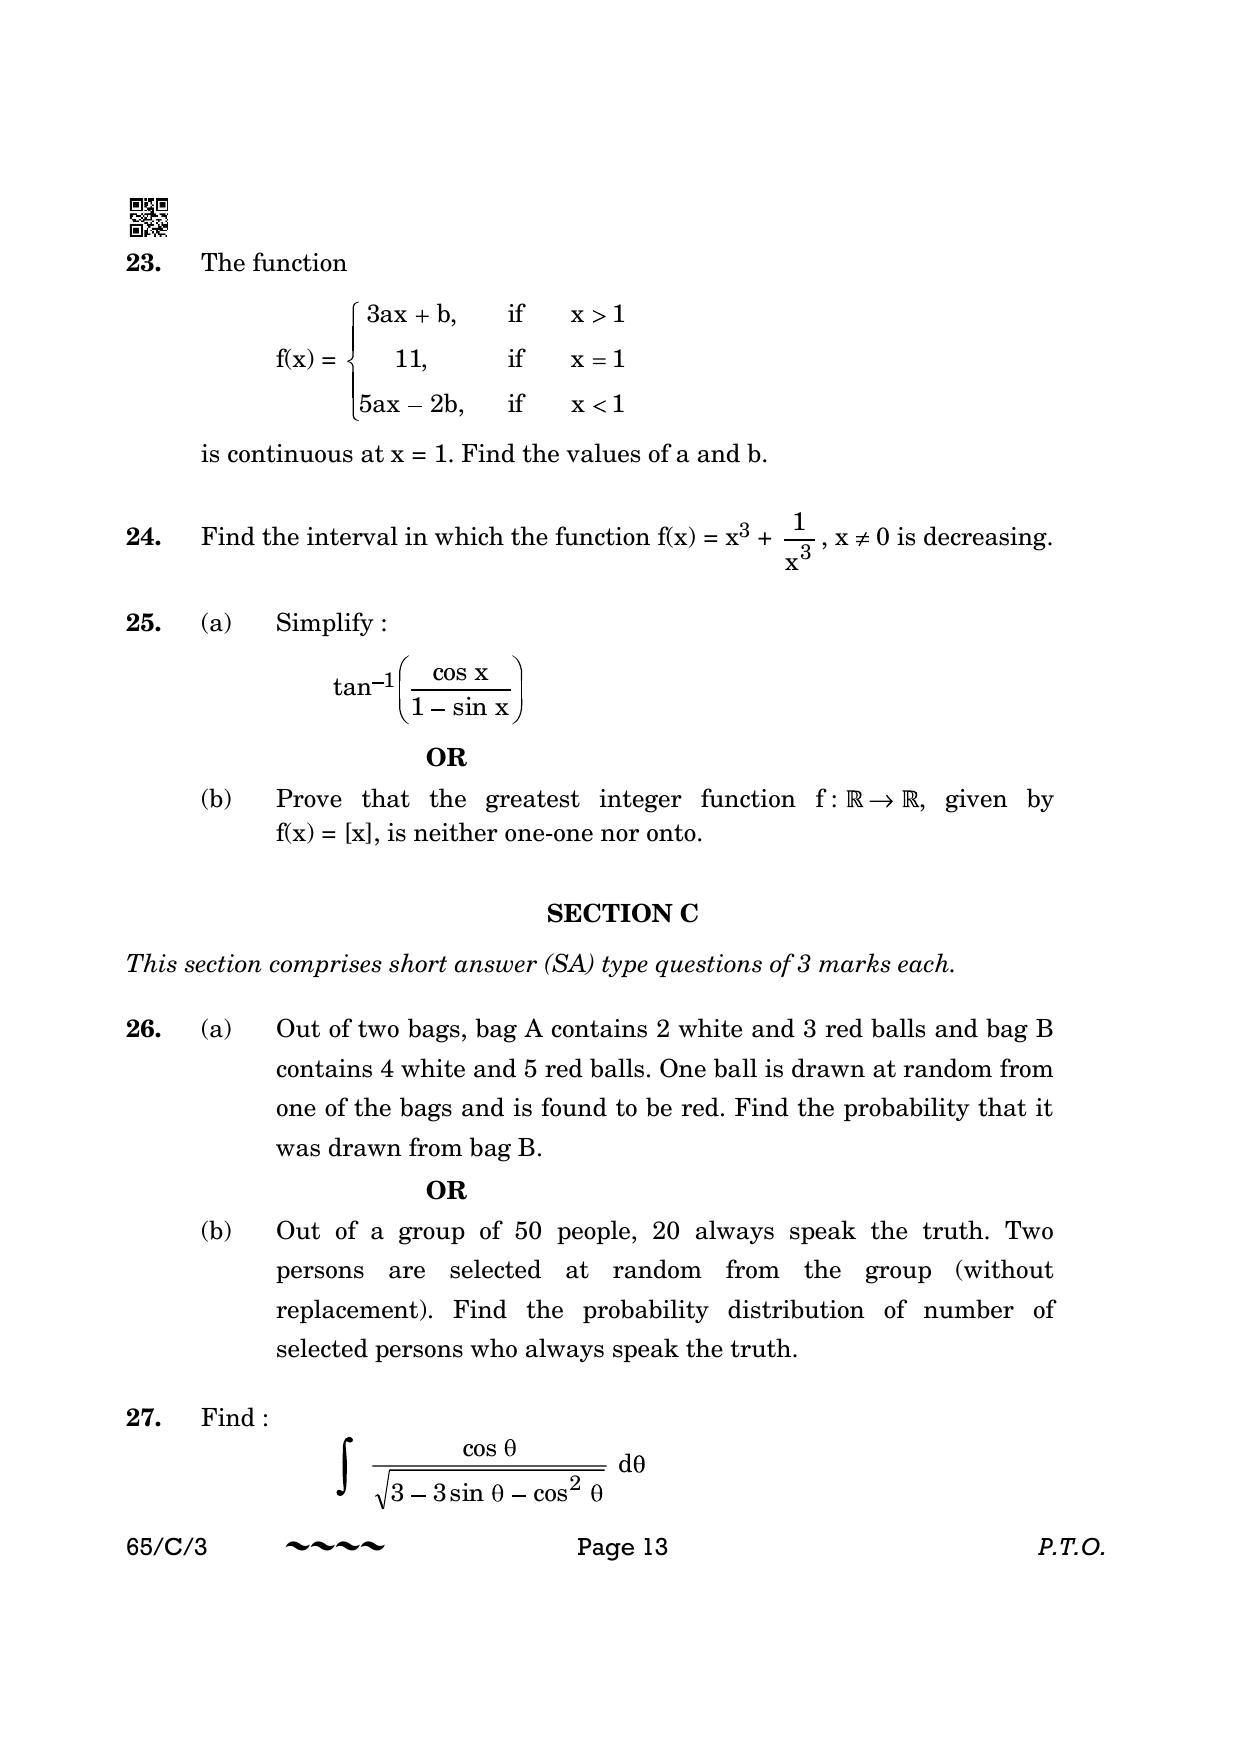 CBSE Class 12 65-3- Mathematics 2023 (Compartment) Question Paper - Page 13